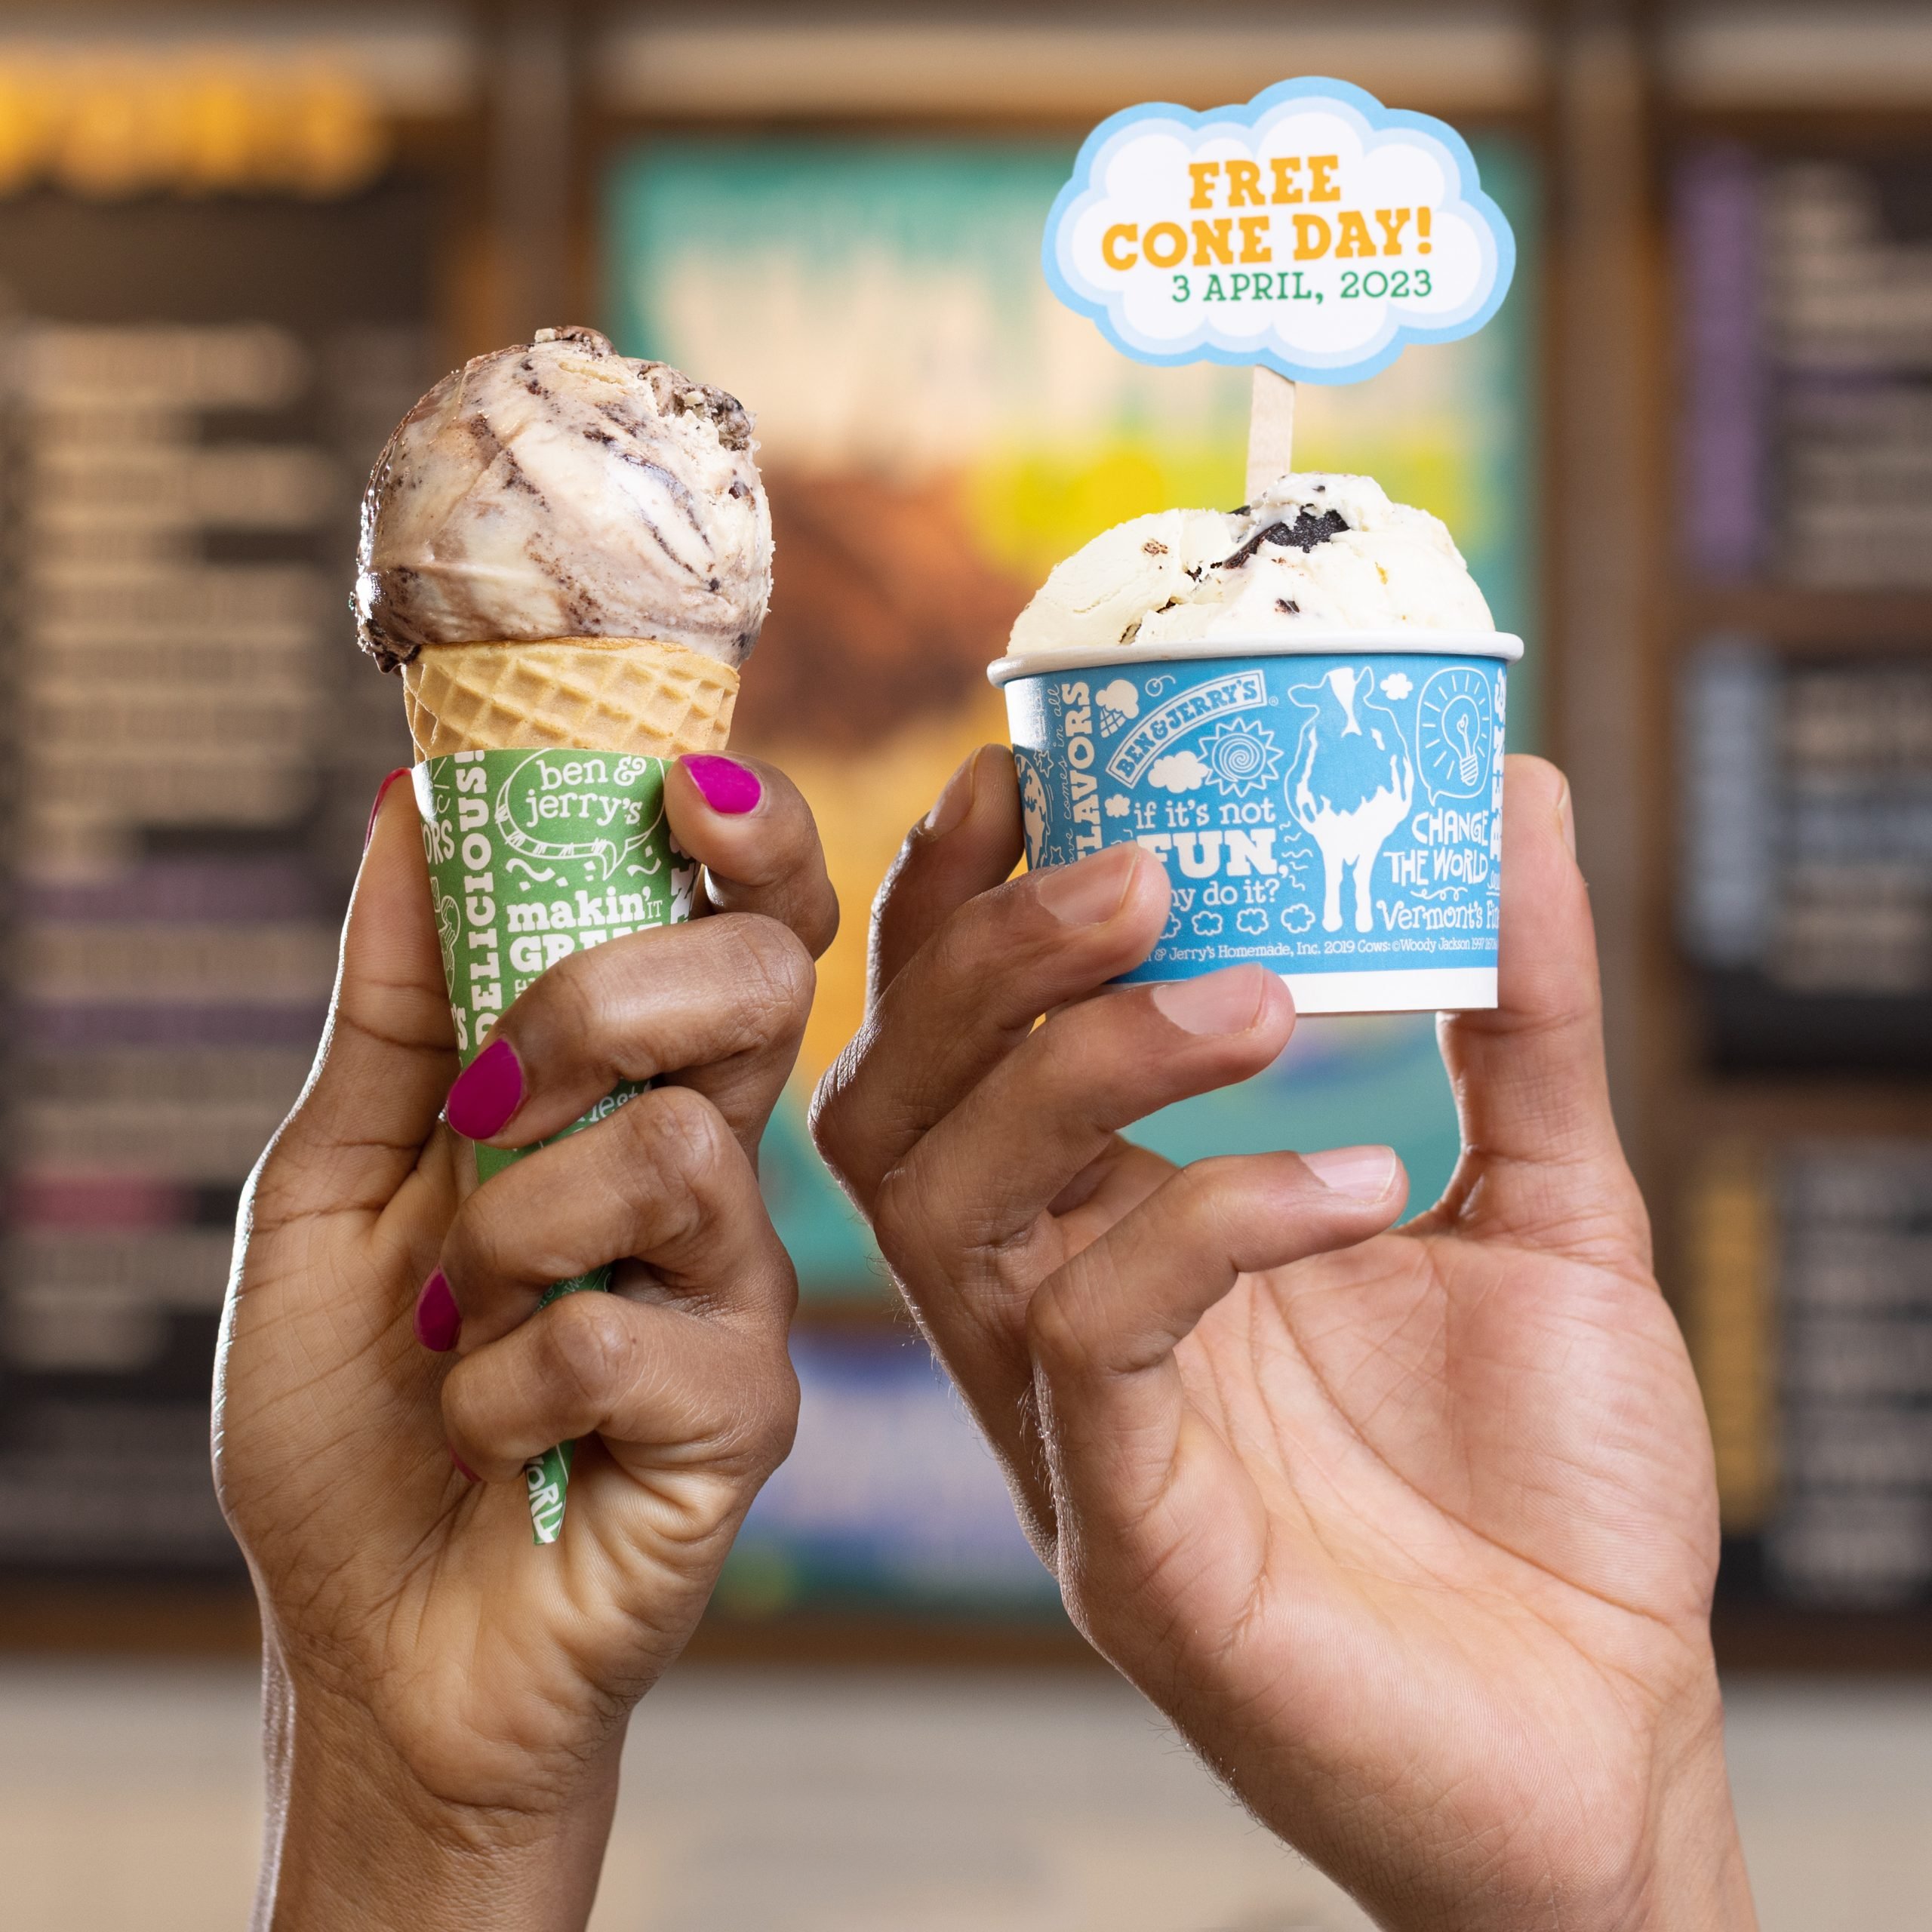 Ben & Jerry’s free cone day is back for you to indulge in your favourite flavours like Chocolate Chip Cookie Dough, Chocolate Therapy & more free-of-charge